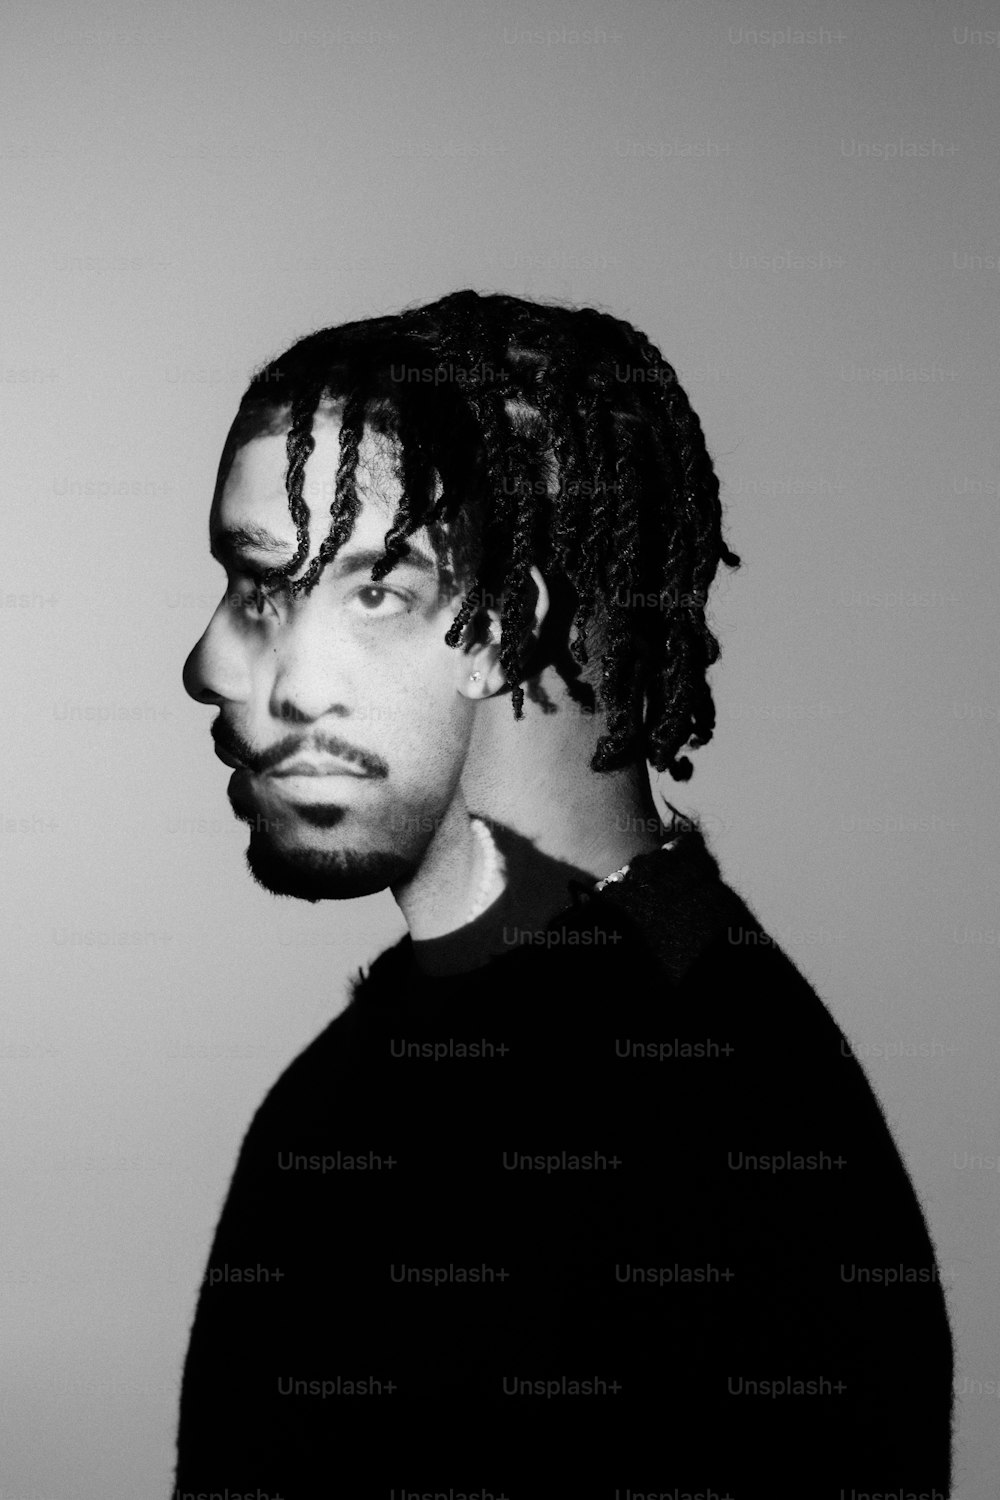 a black and white photo of a man with dreadlocks